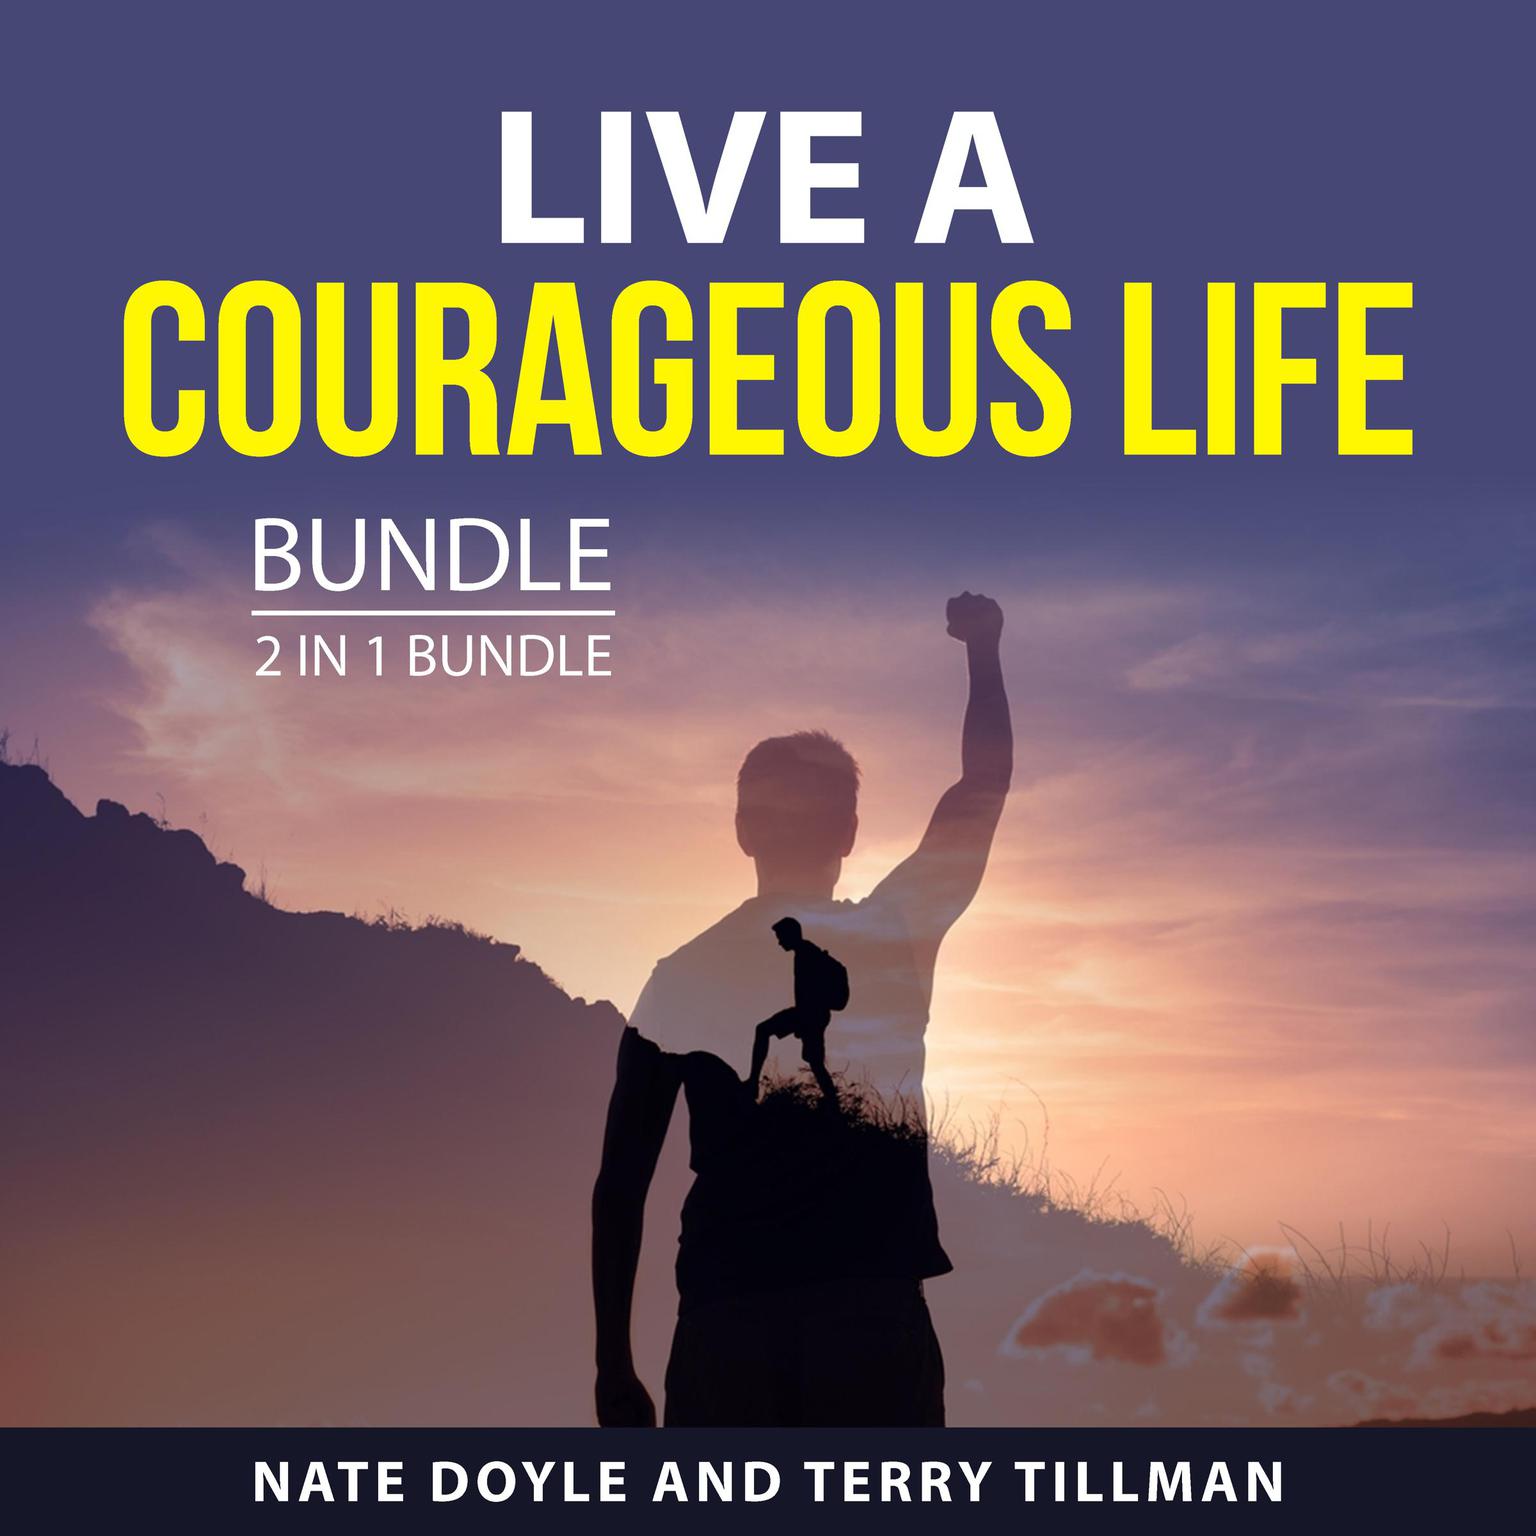 Live a Courageous Life Bundle, 2 in 1 Bundle Audiobook, by Nate Doyle